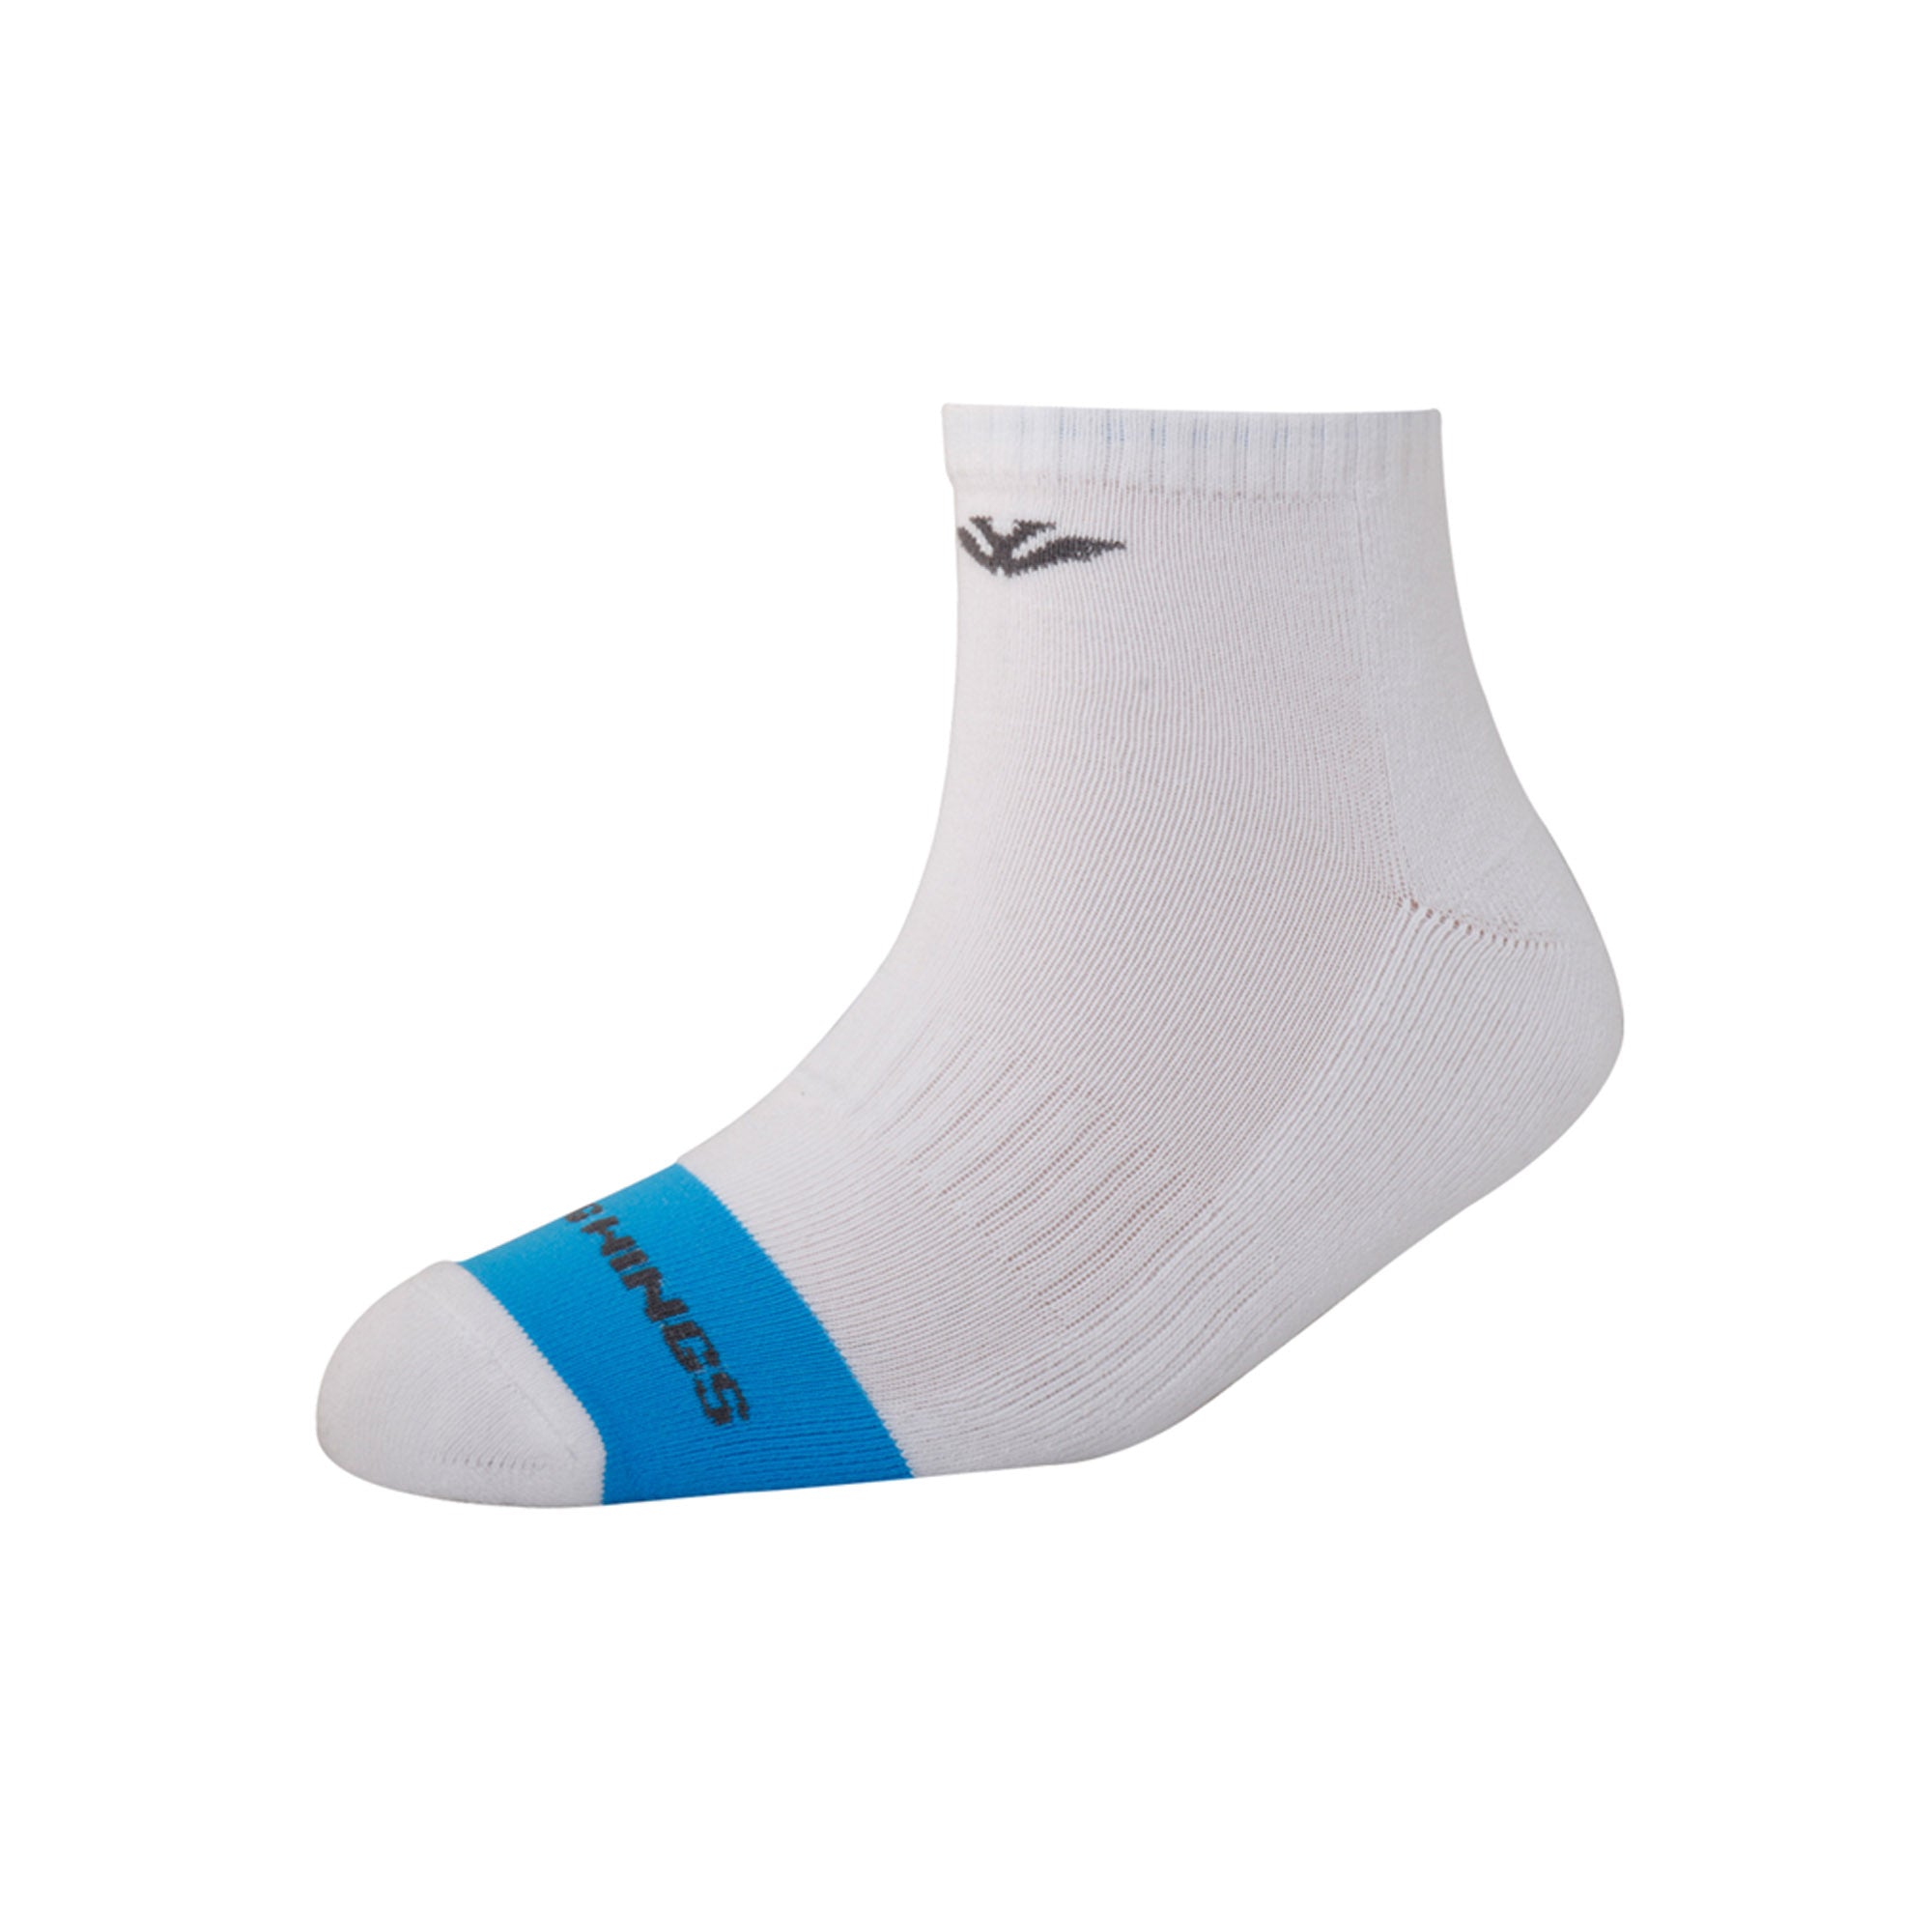 Men's TS01 Pack of 3 Cotton Terry Fashion Sports Ankle Socks